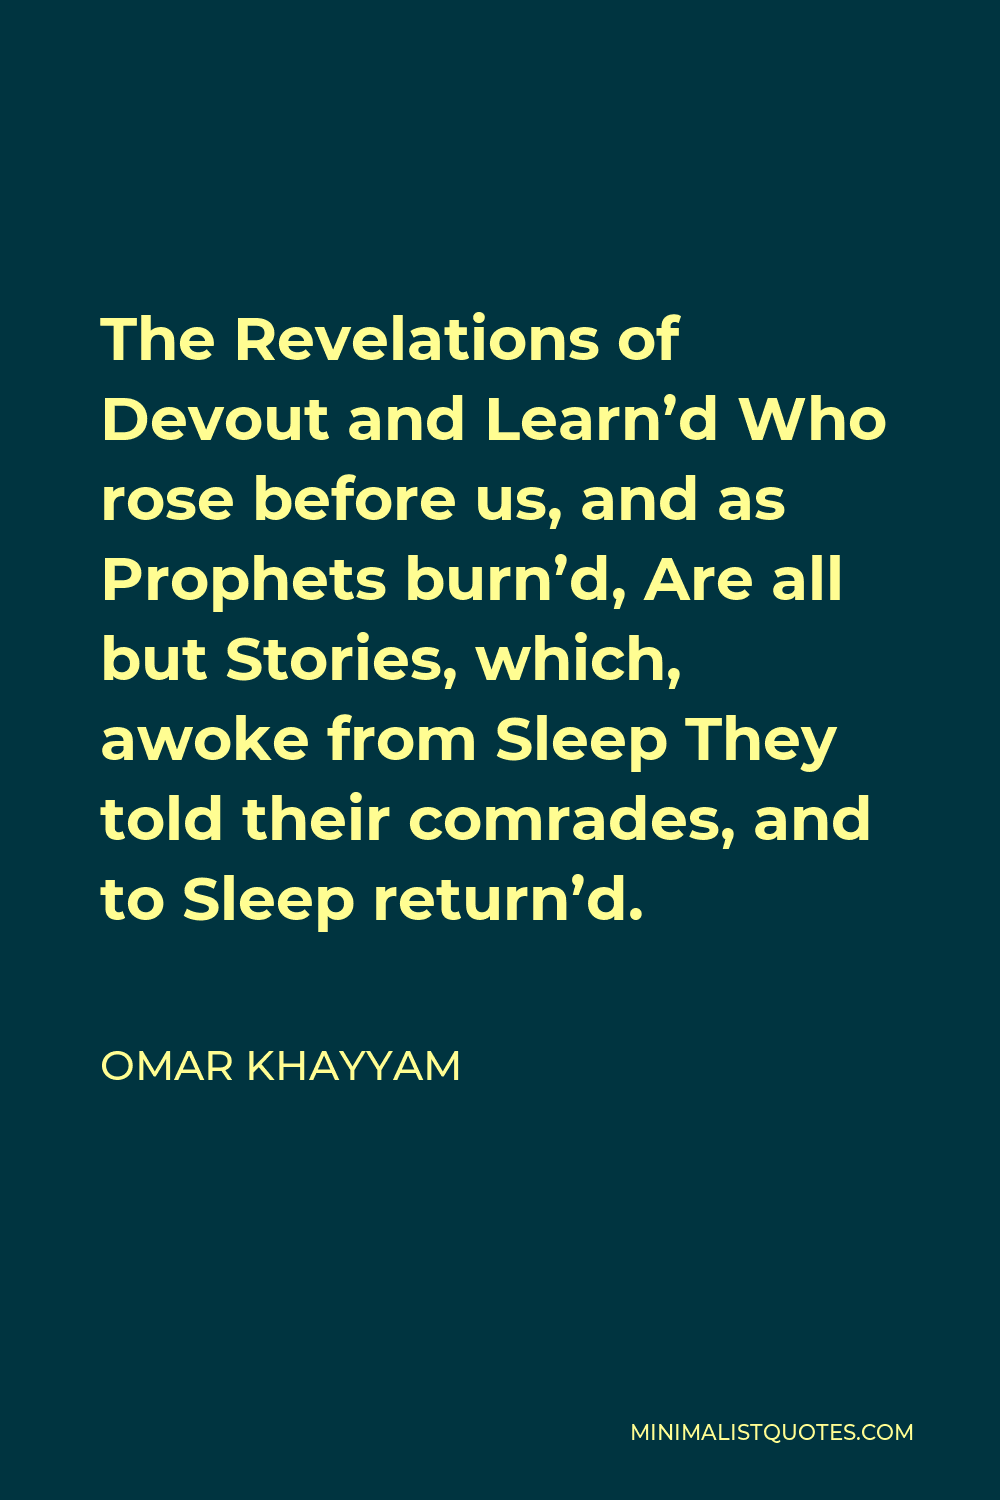 Omar Khayyam Quote - The Revelations of Devout and Learn’d Who rose before us, and as Prophets burn’d, Are all but Stories, which, awoke from Sleep They told their comrades, and to Sleep return’d.